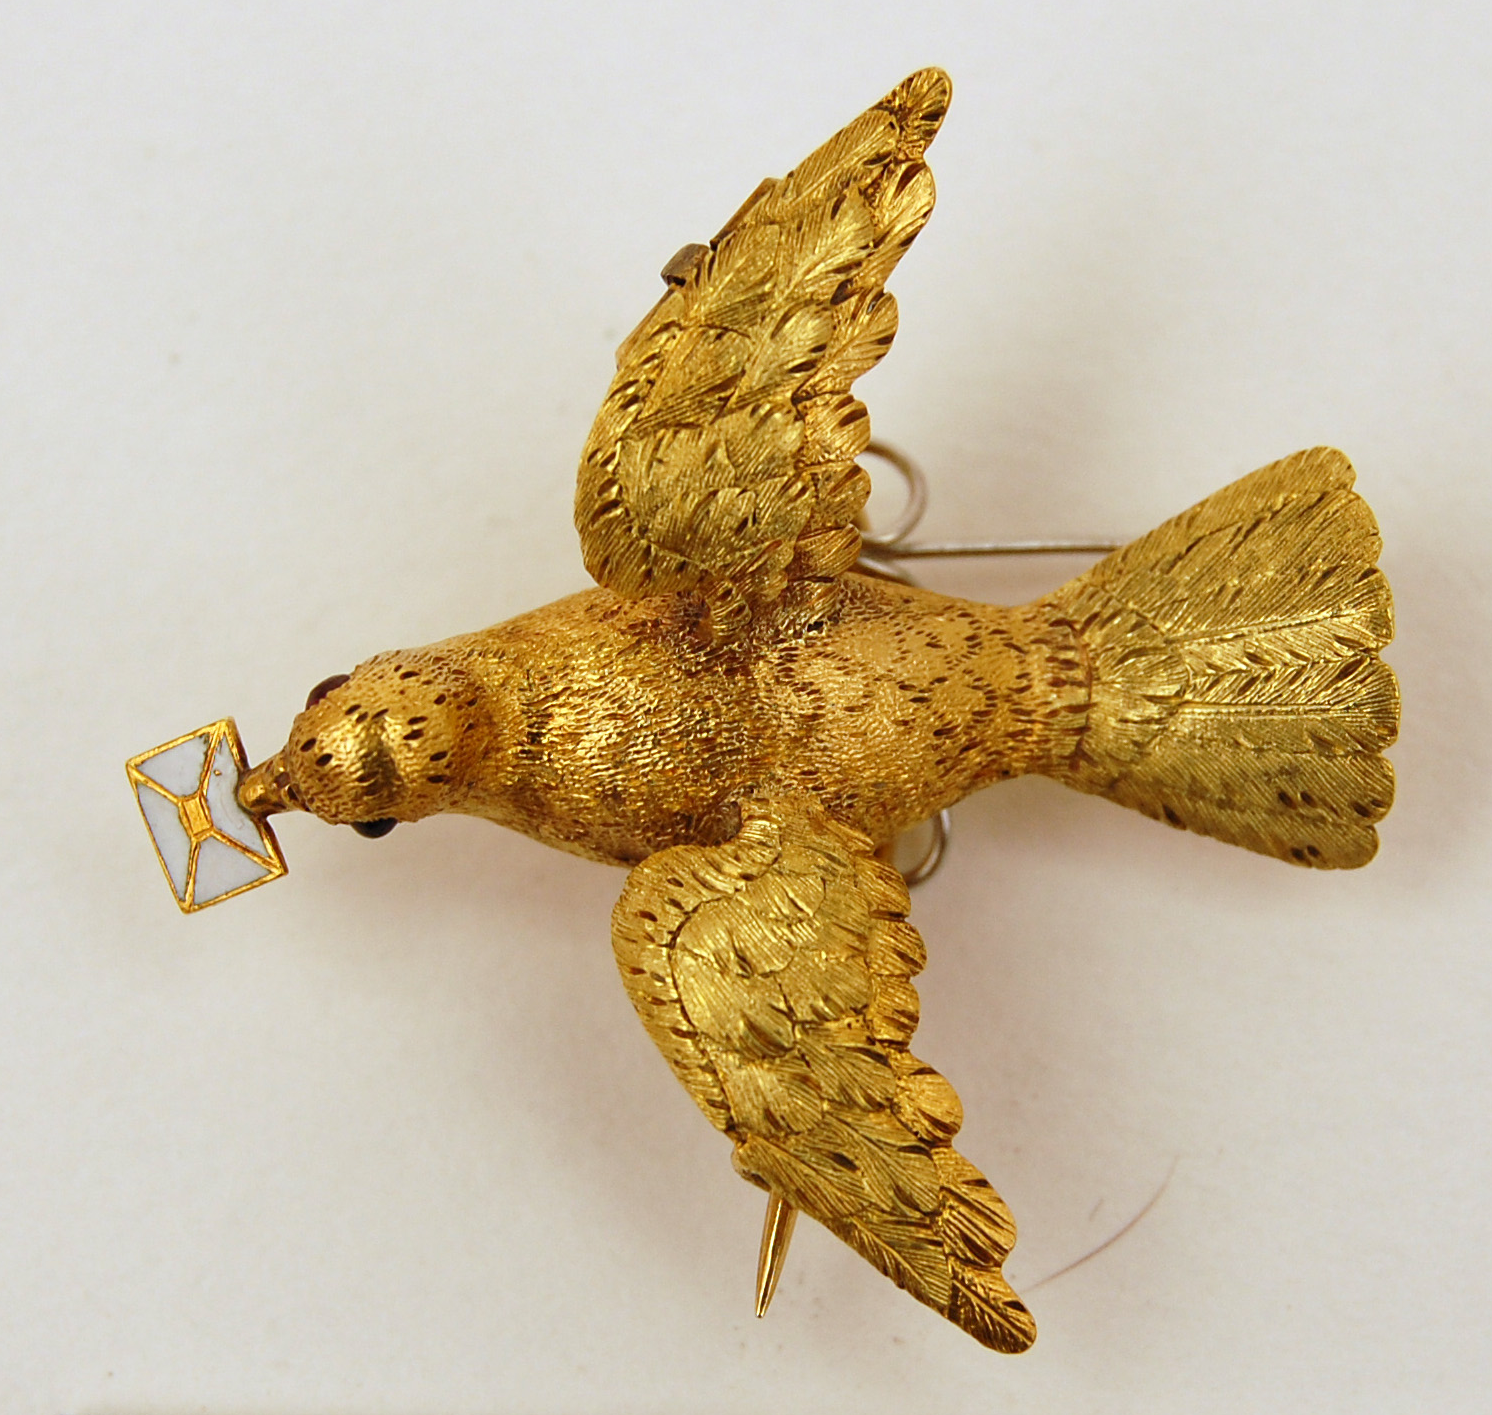 Gold dove holding a white enameled envelope, 1850. The British Museum.